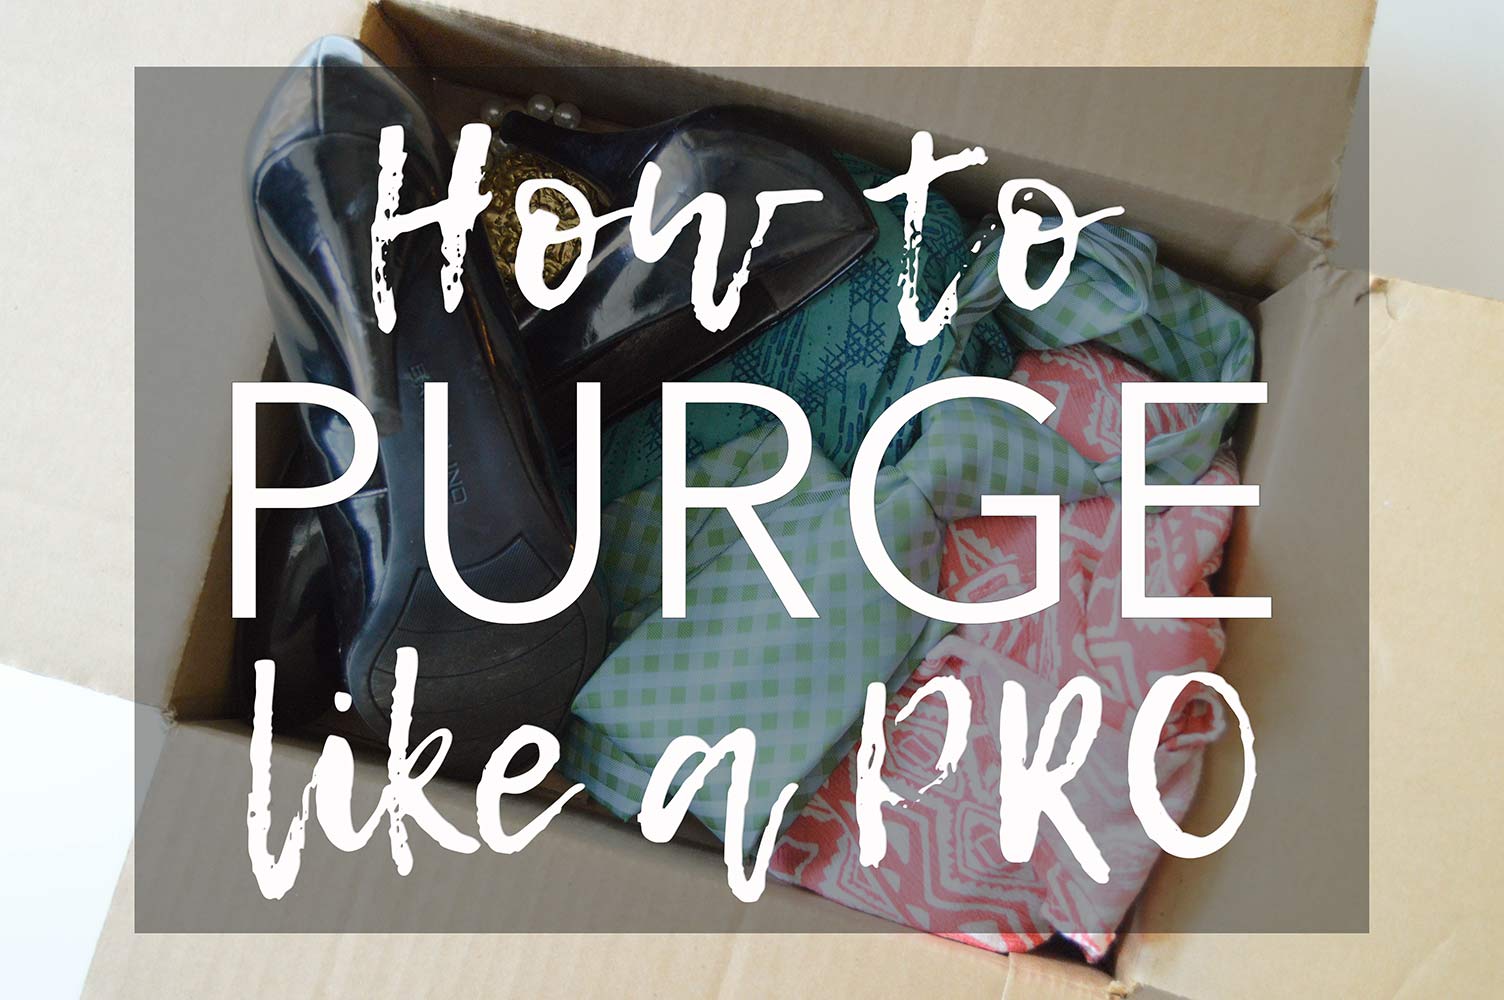 Tips for how to purge and organize your home like a pro. Steps for sorting into piles and purging rules to help you eliminate clutter and get rid of stuff.